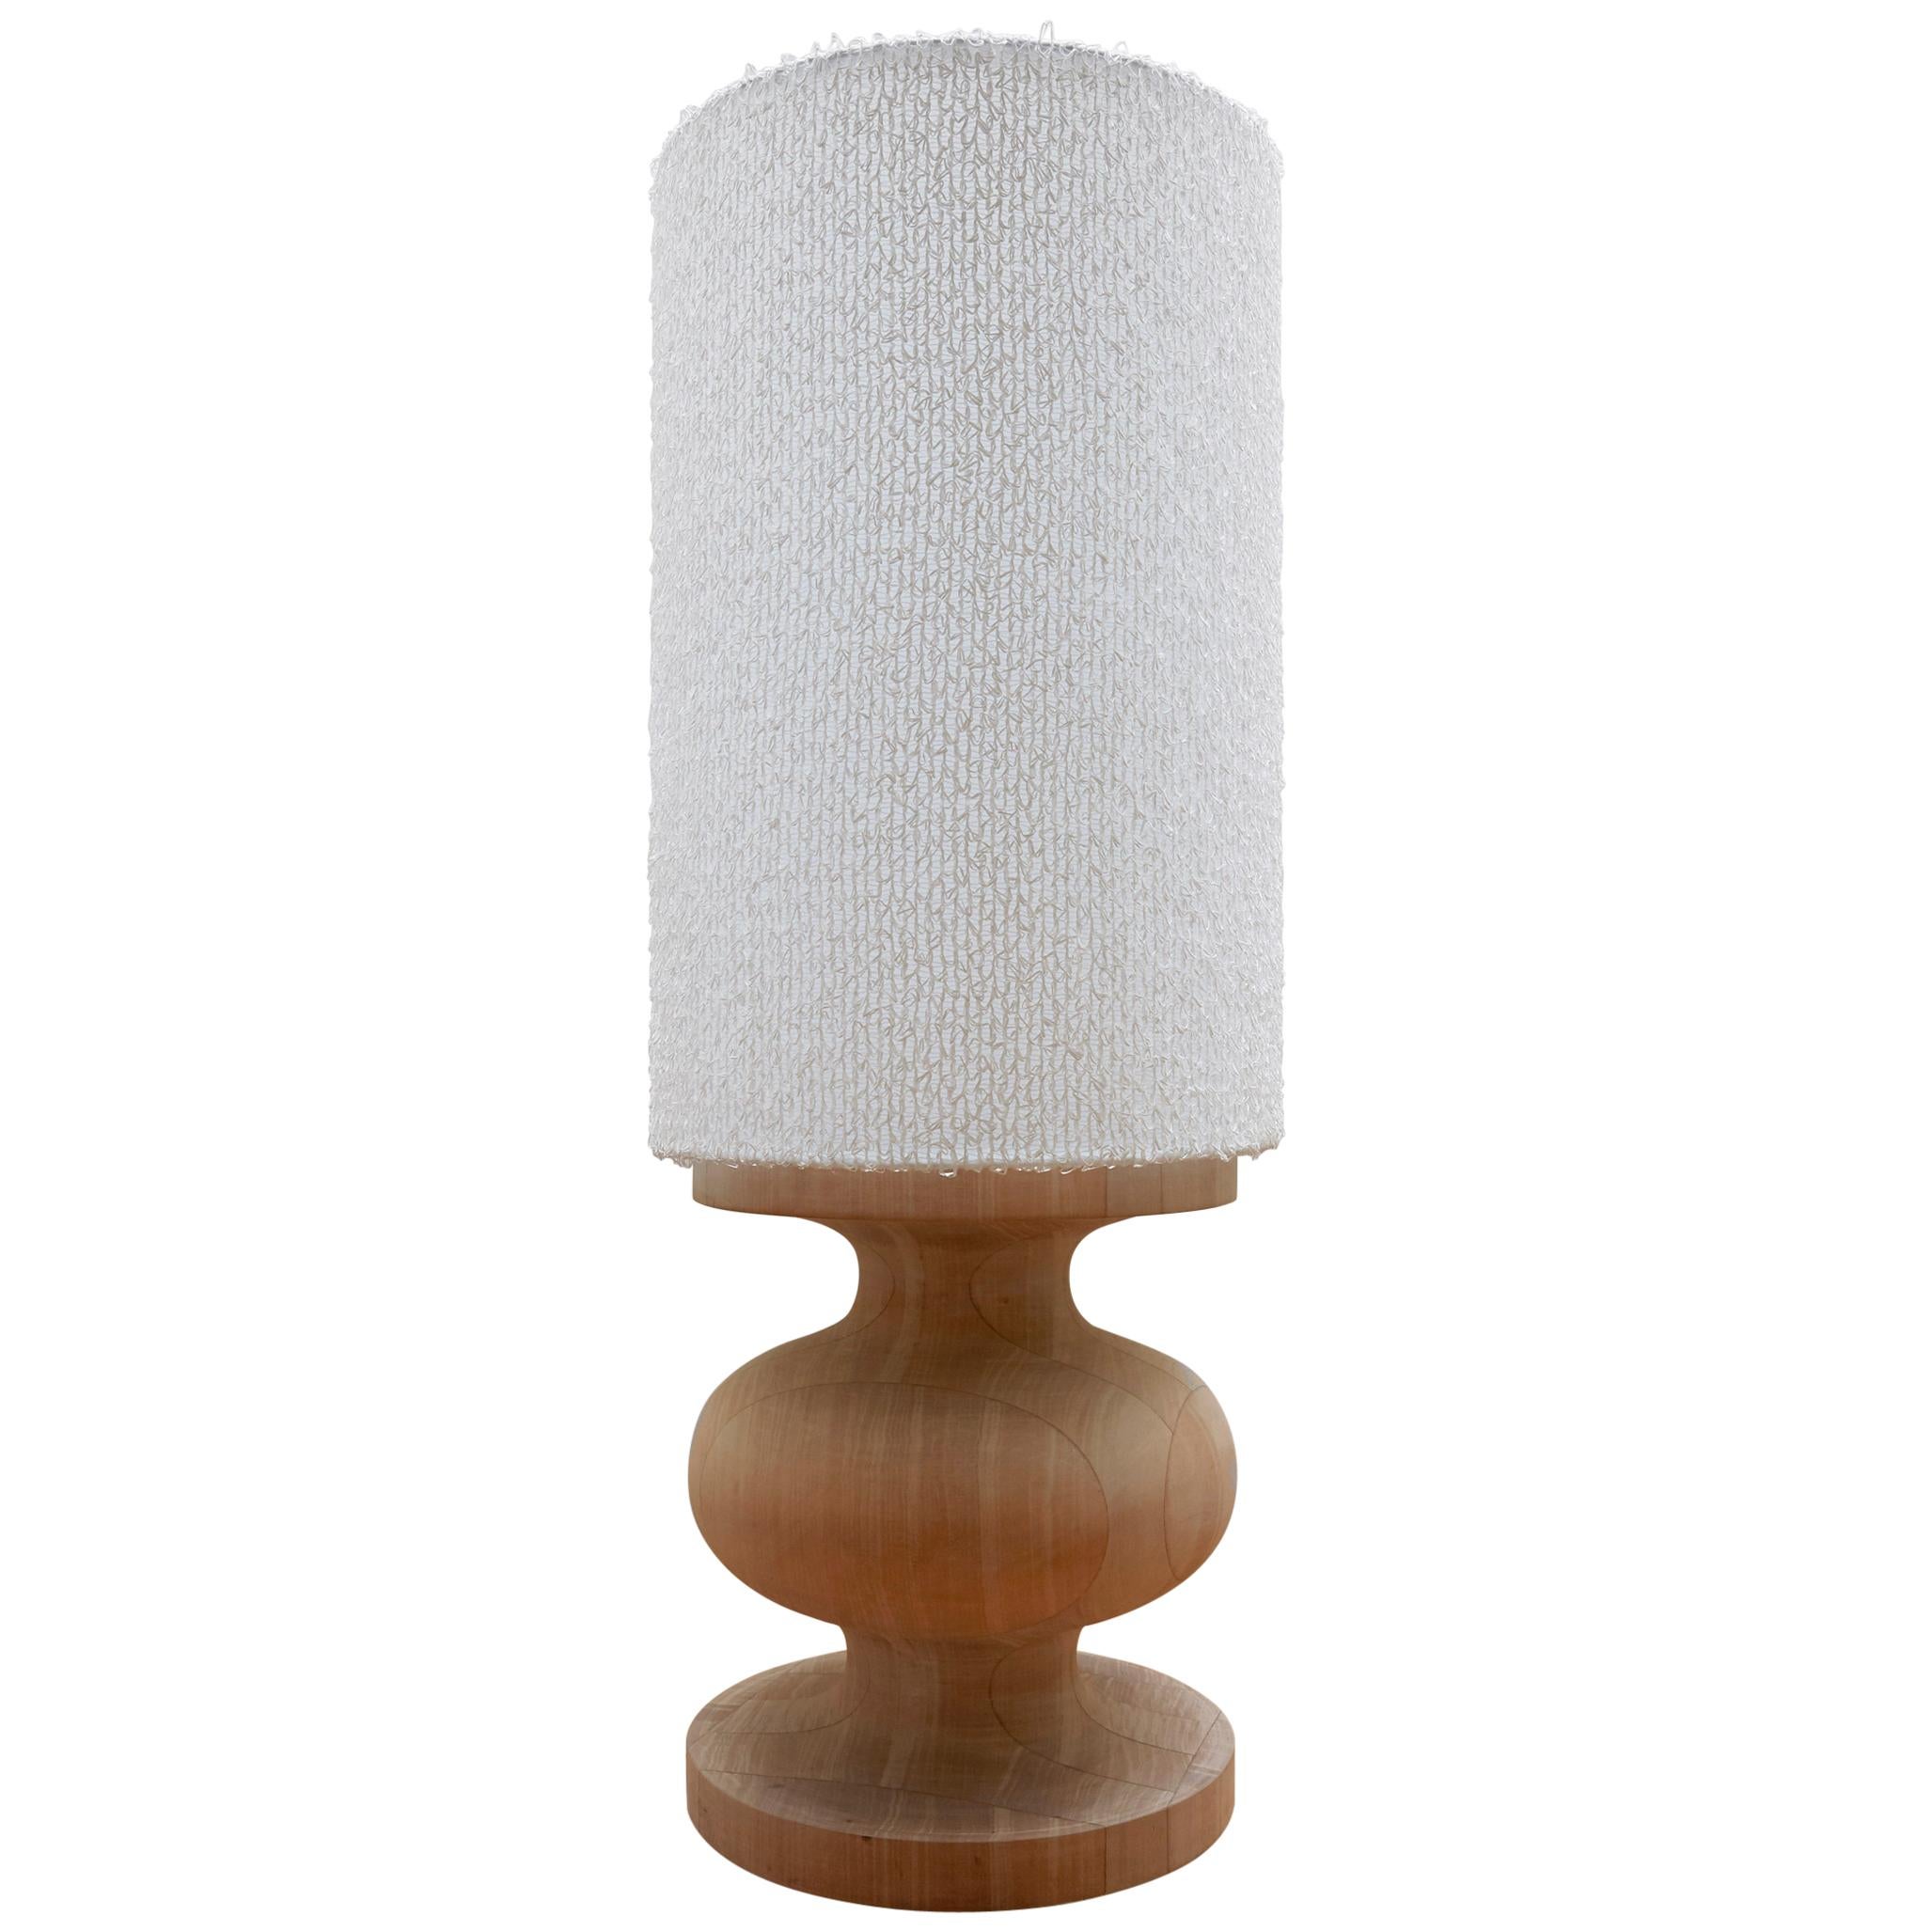 Organic, minimal, sculptural, refined, this very large, handcrafted solid timber table lamp makes a sculptural statement. Frank Fringe Lamp  is an example of 21st century organic modernism inspired by Arp's and Brancusi's  minimal 20th century